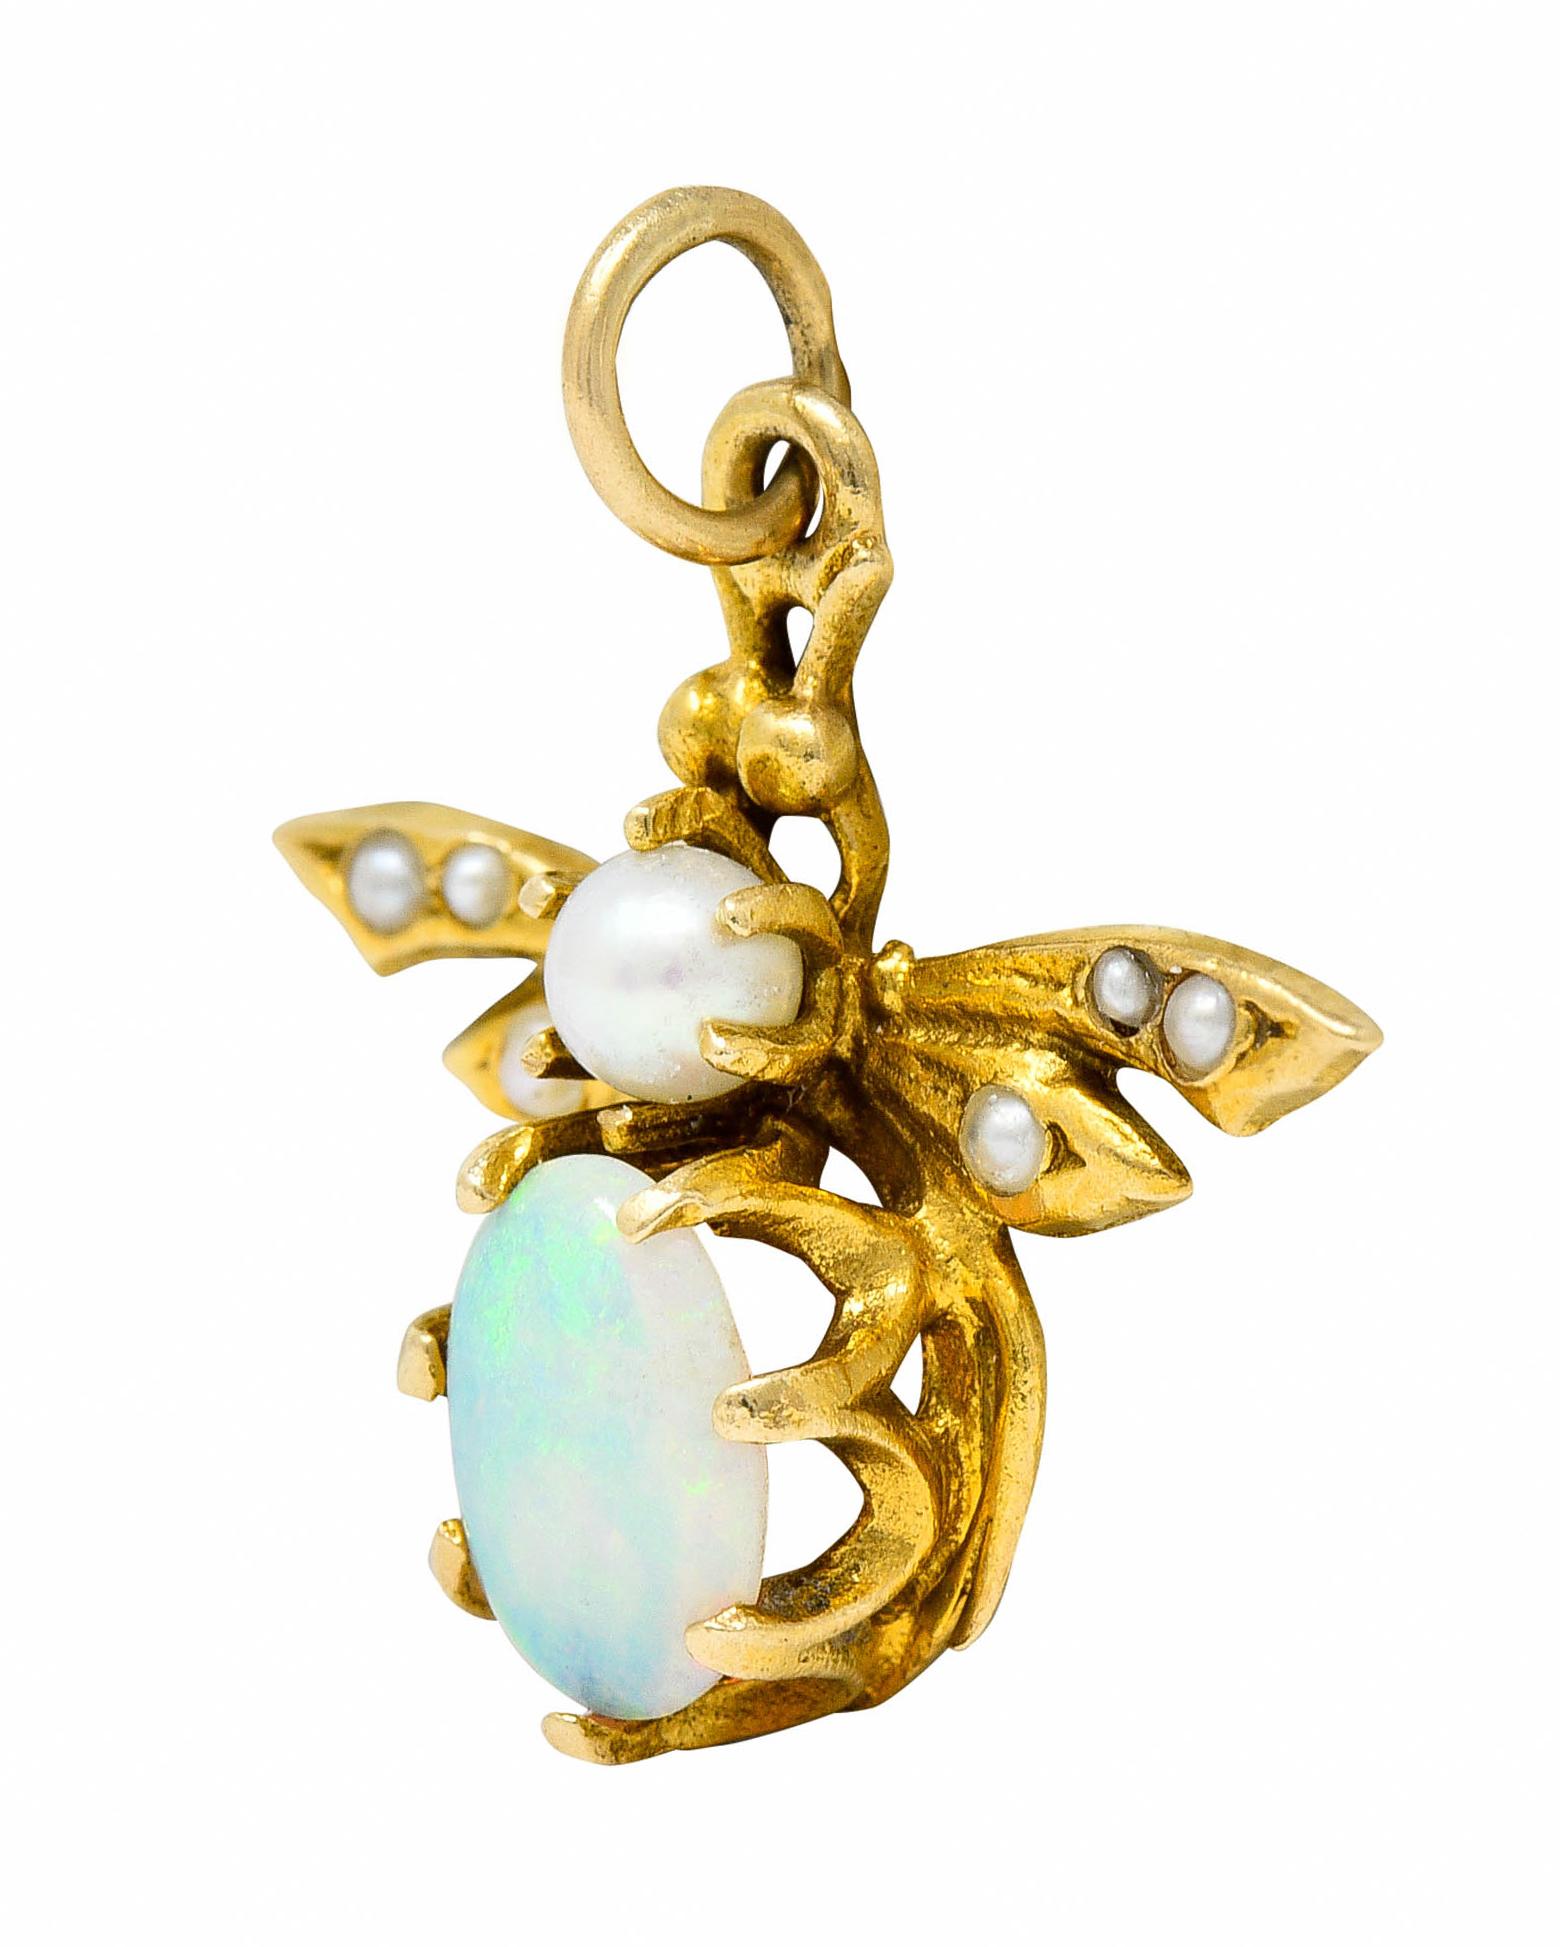 Charm is designed as a stylized winged insect

Featuring a belcher set oval opal cabochon measuring approximately 8.0 x 5.0 mm

Translucent with strong yellow to green play-of-color

Body is set with a 3.0 mm round pearl - white in body color with